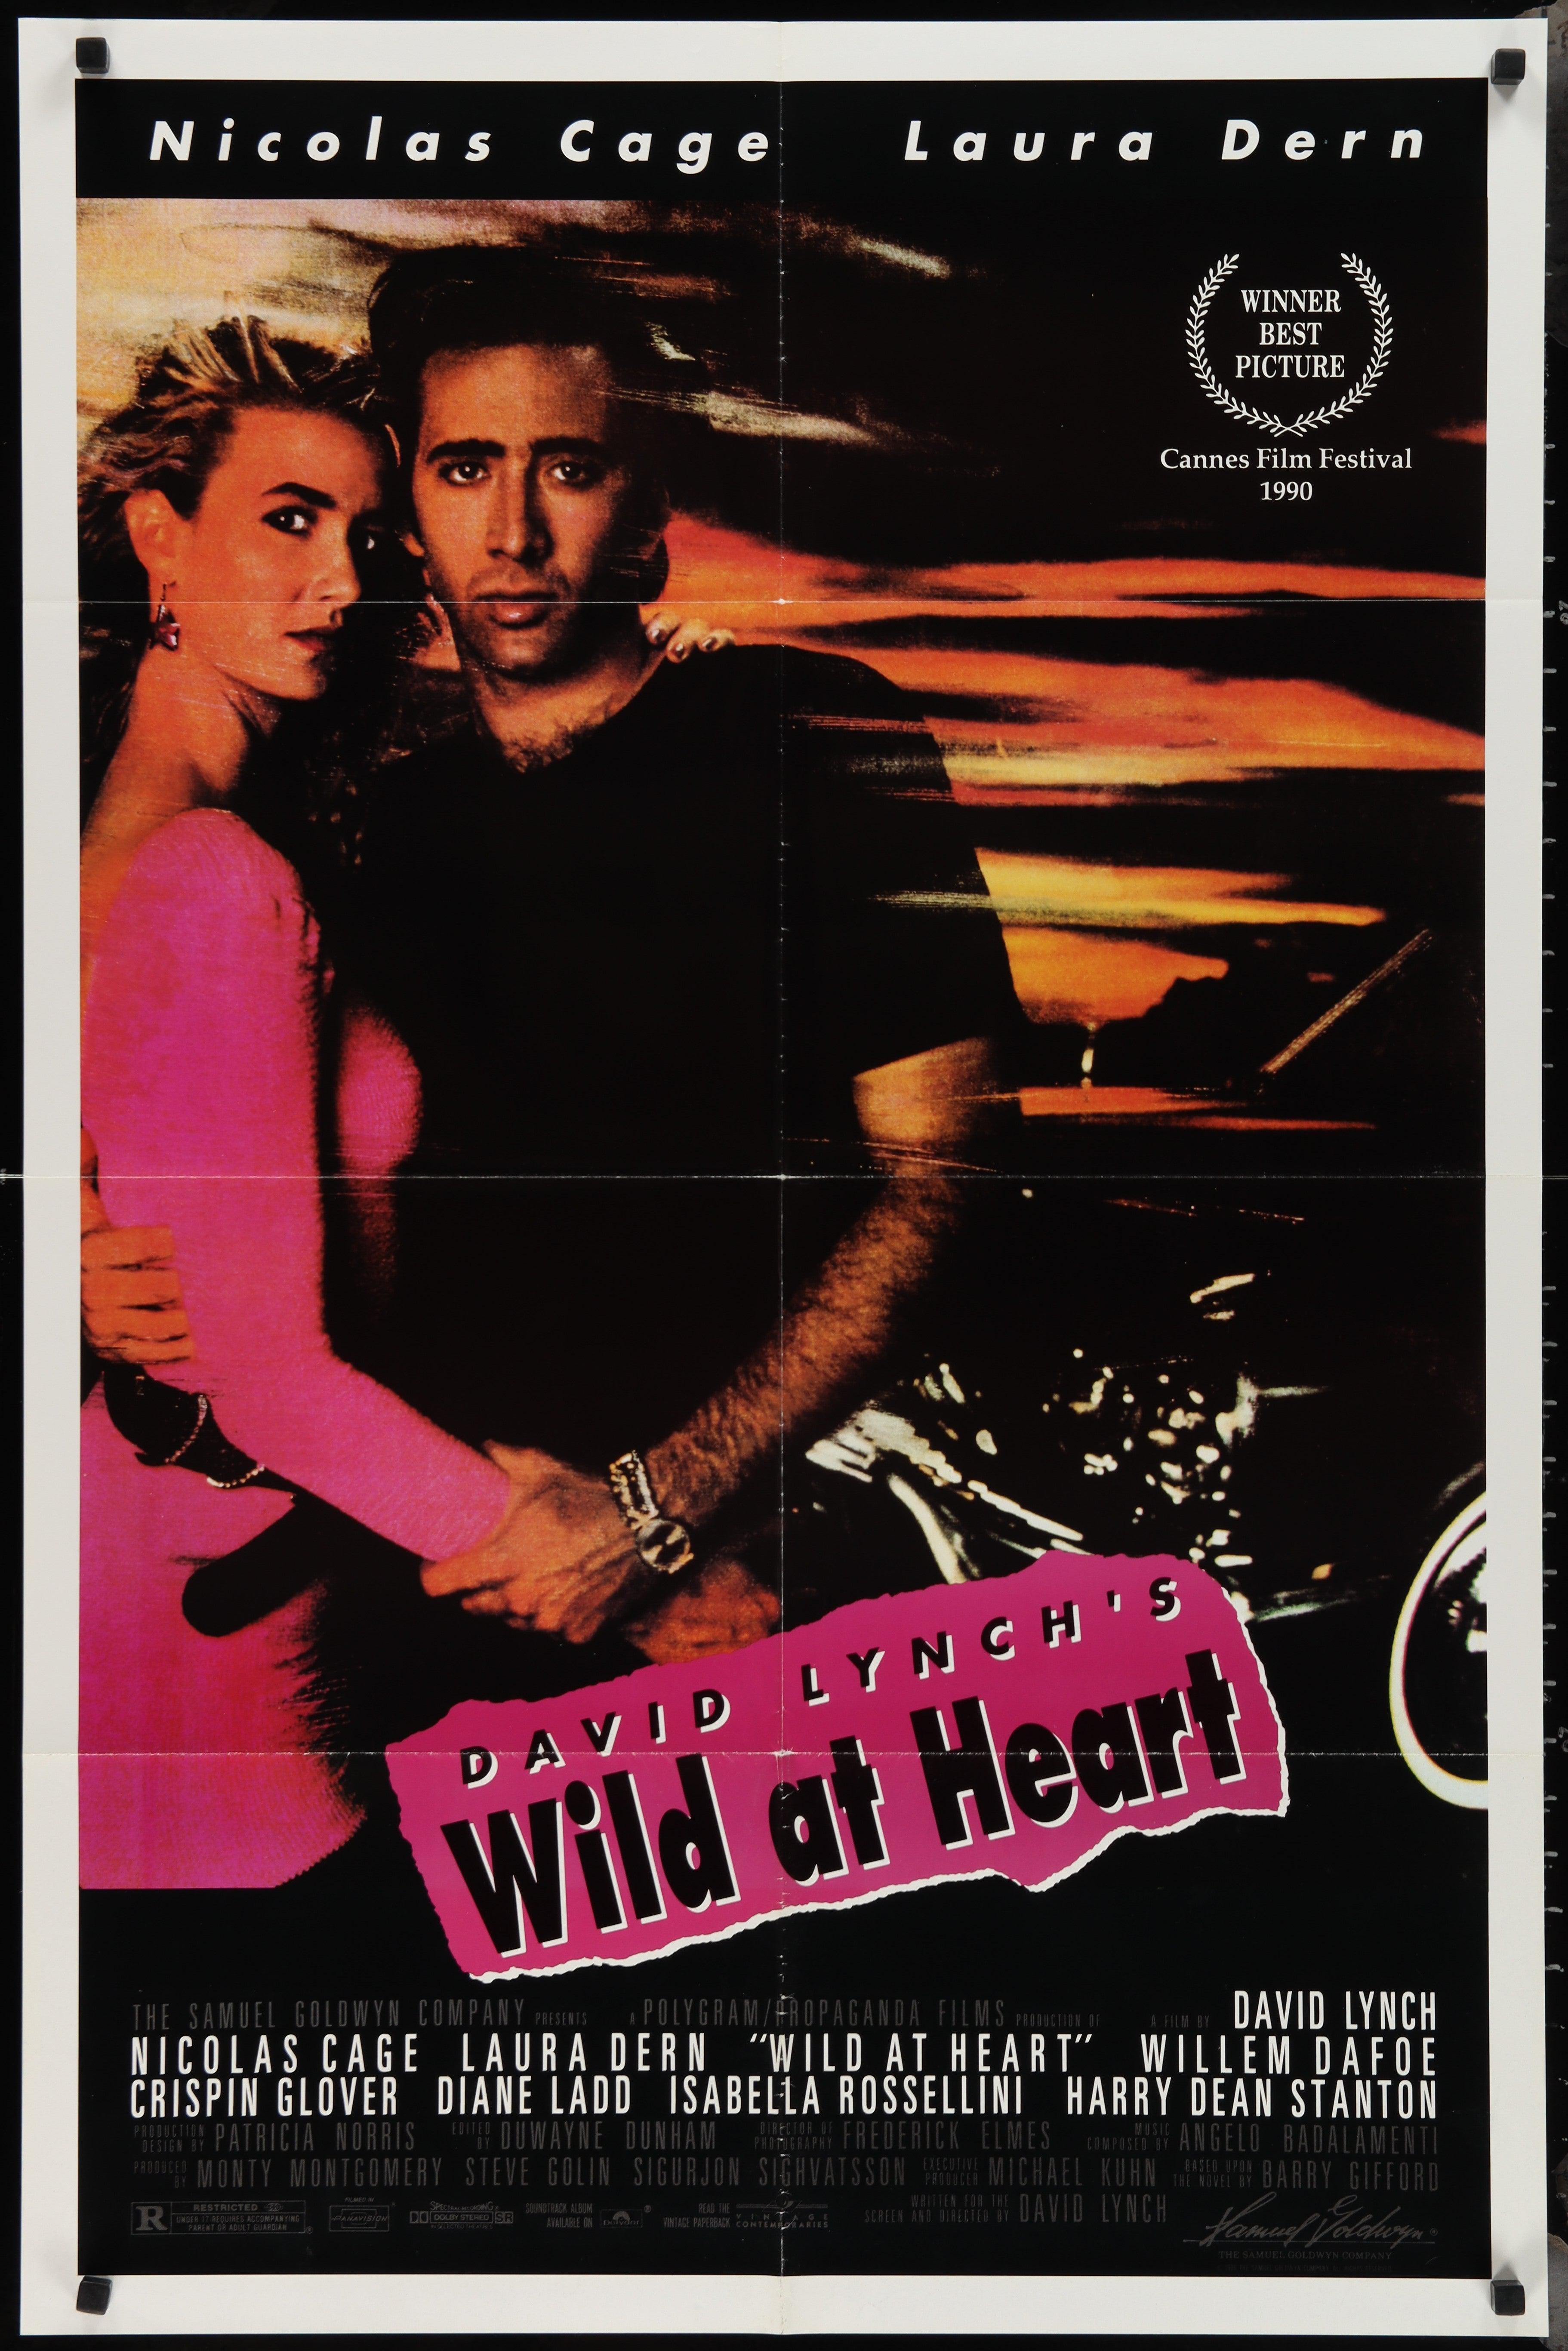 Wild at Heart (1990) — Art of the Title